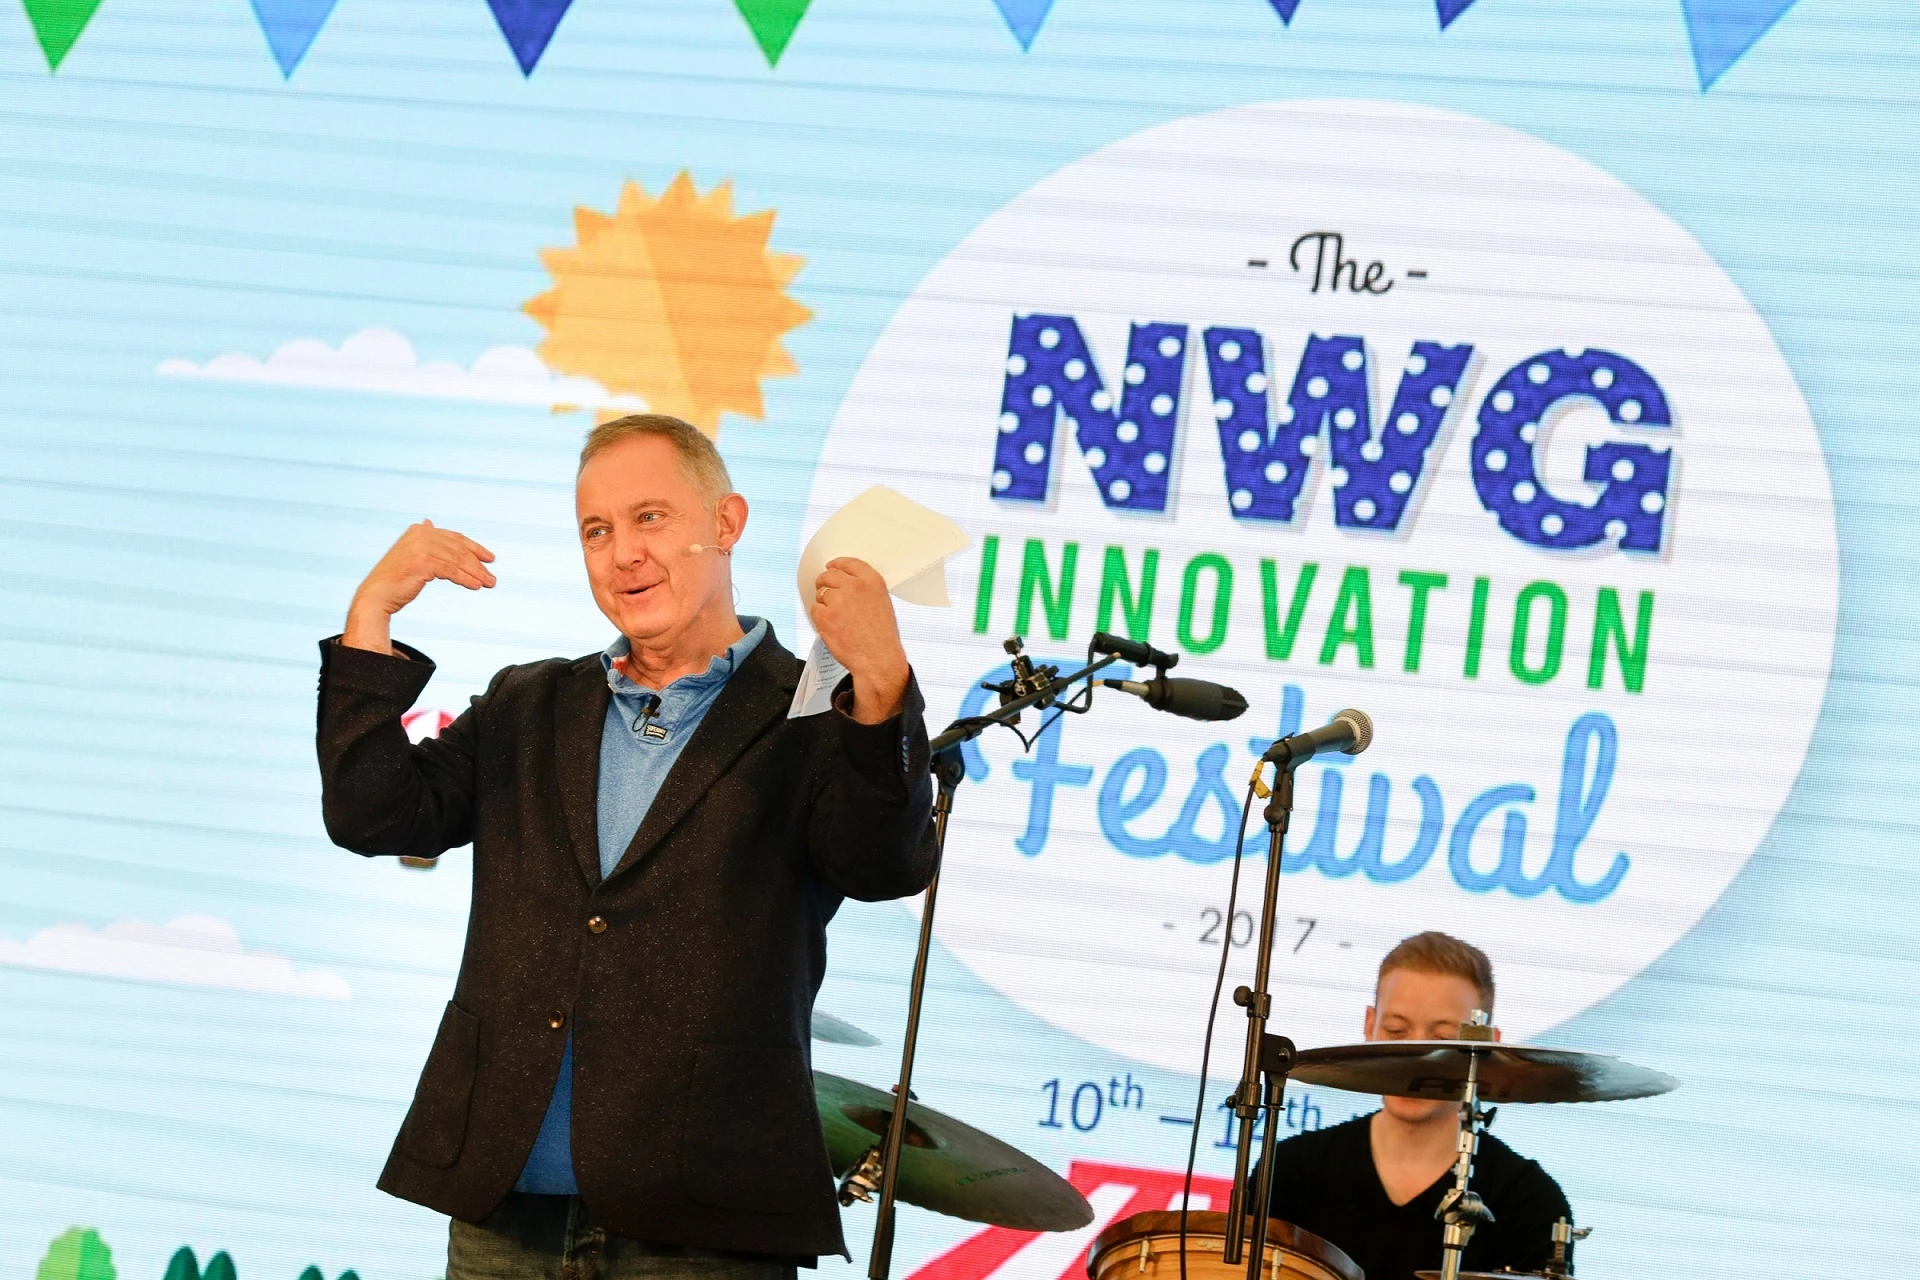 Northumbrian Water's Nigel Watson at the Innovation Festival 